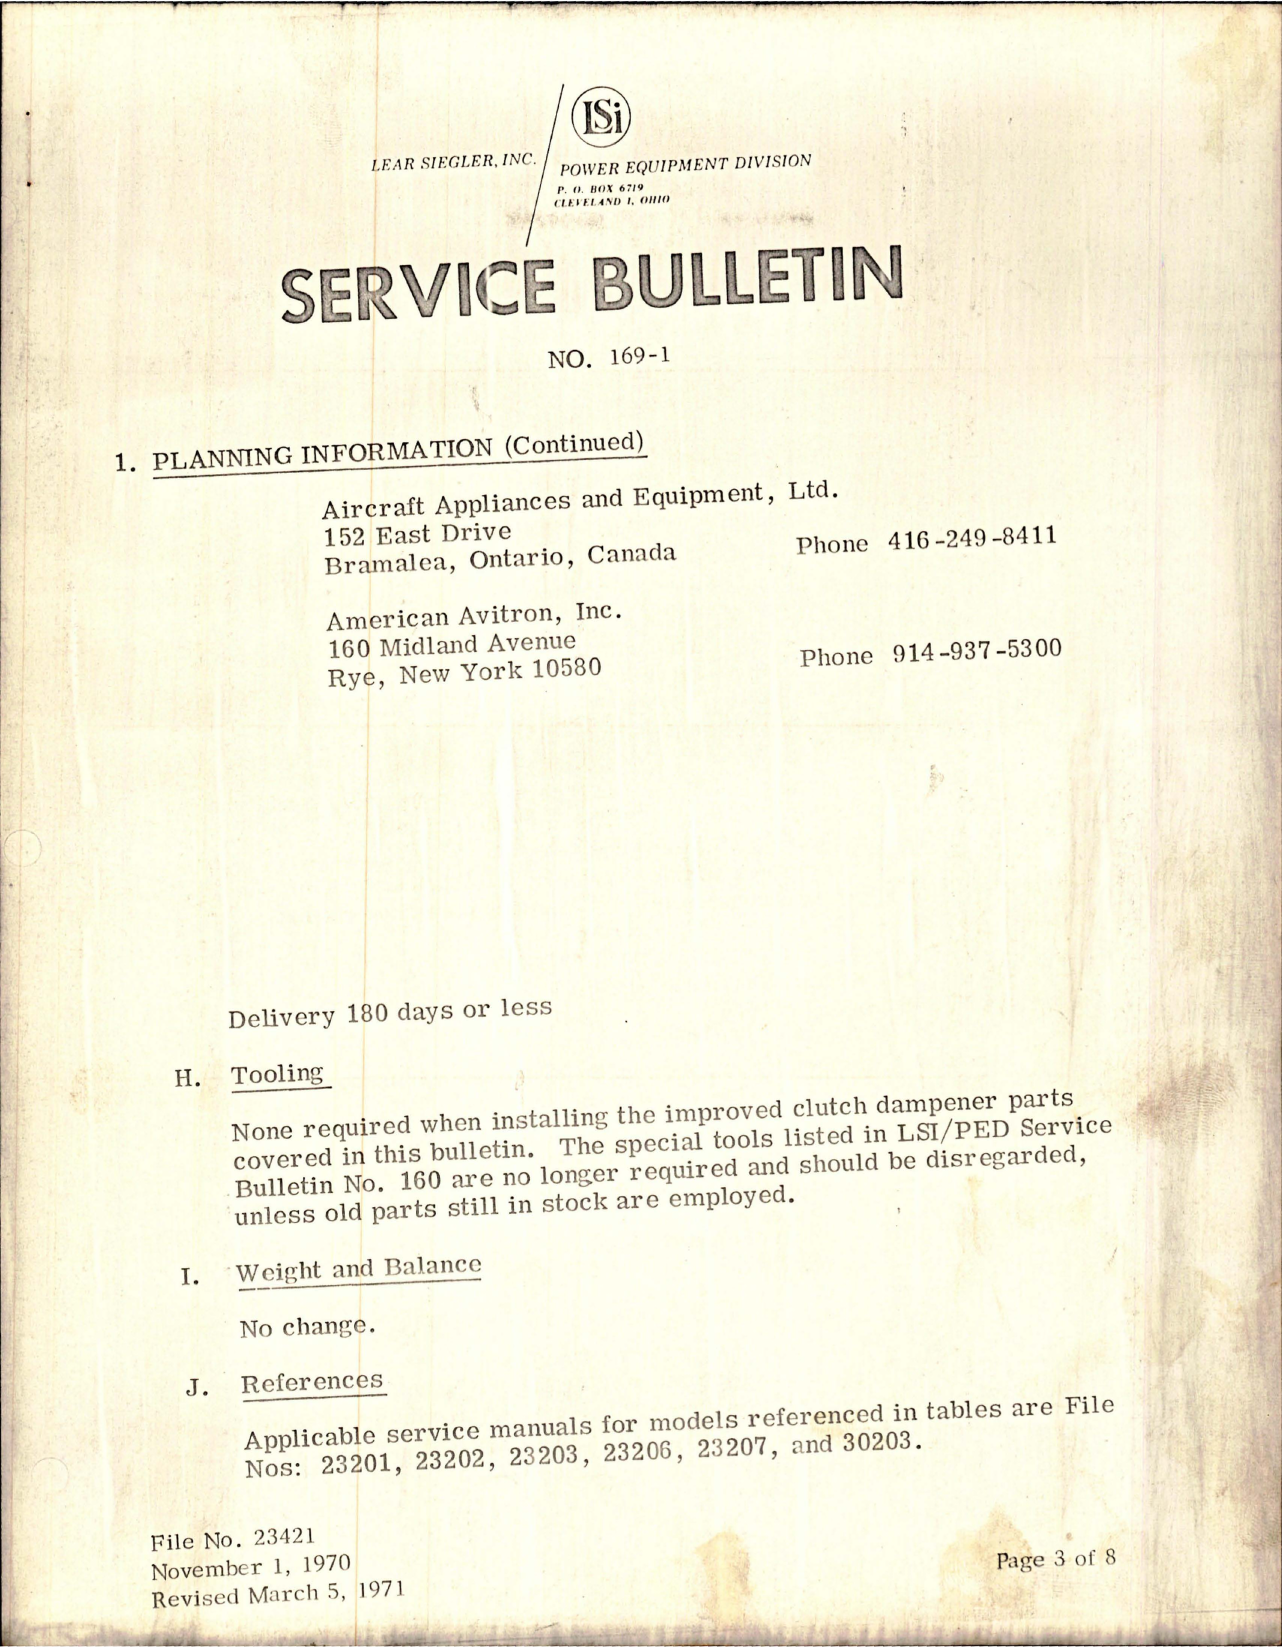 Sample page 5 from AirCorps Library document: Service Bulletin No. 169-1 for DC Generator and Starter Generators - Usage of New Clutch Dampener and Back Plate Assemblies